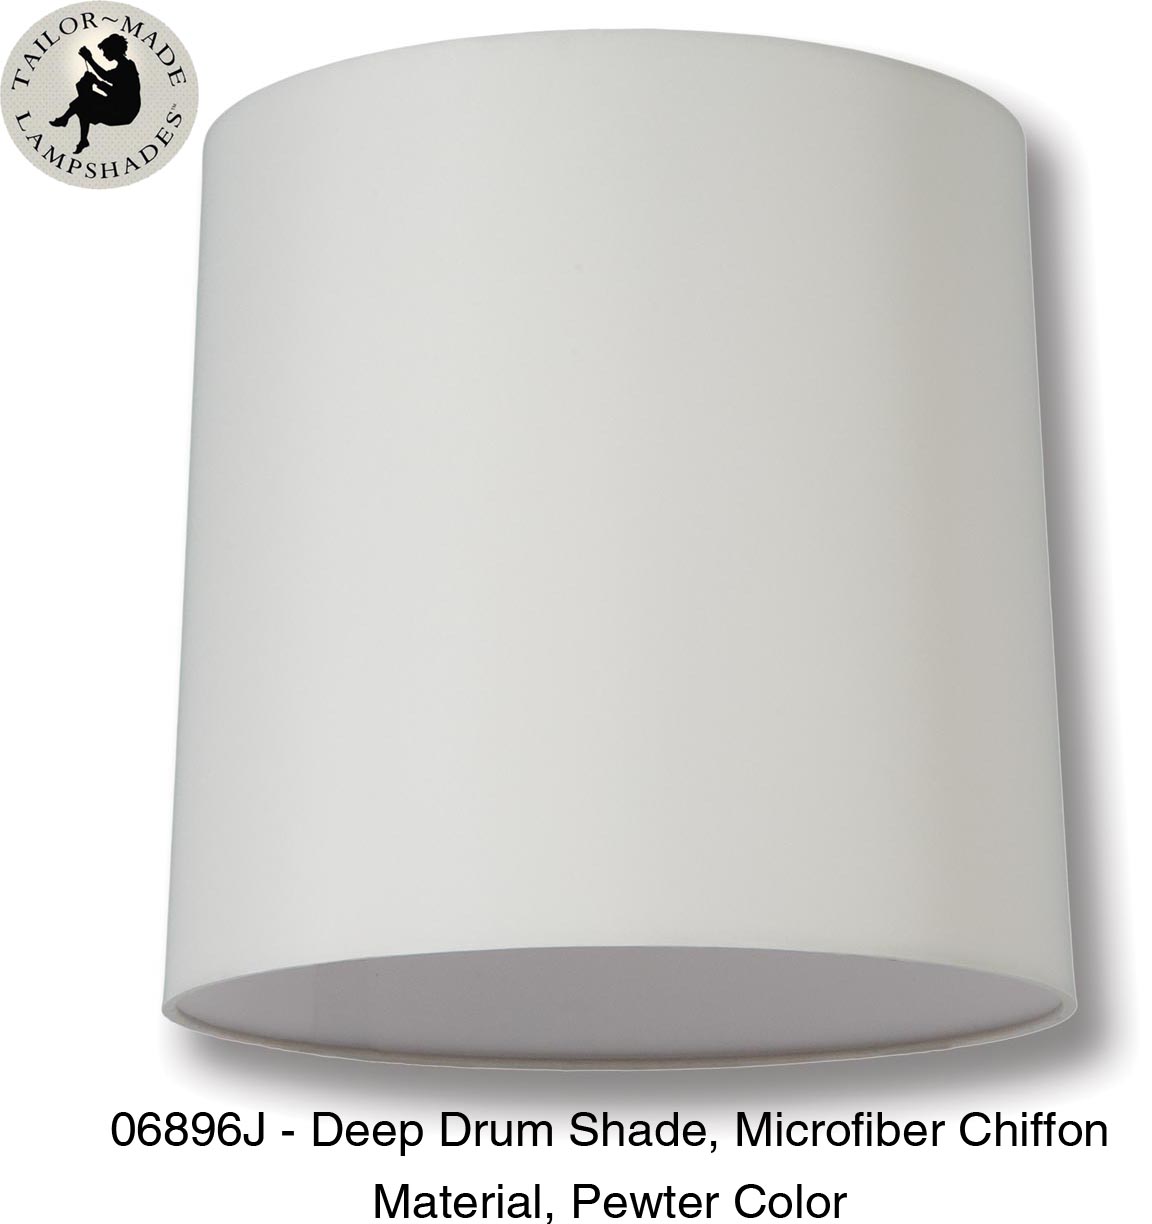 Deep Drum Hardback Lamp Shades - Ivory Color, Microfiber Chiffon Material, Brass Plated Washer Fitter